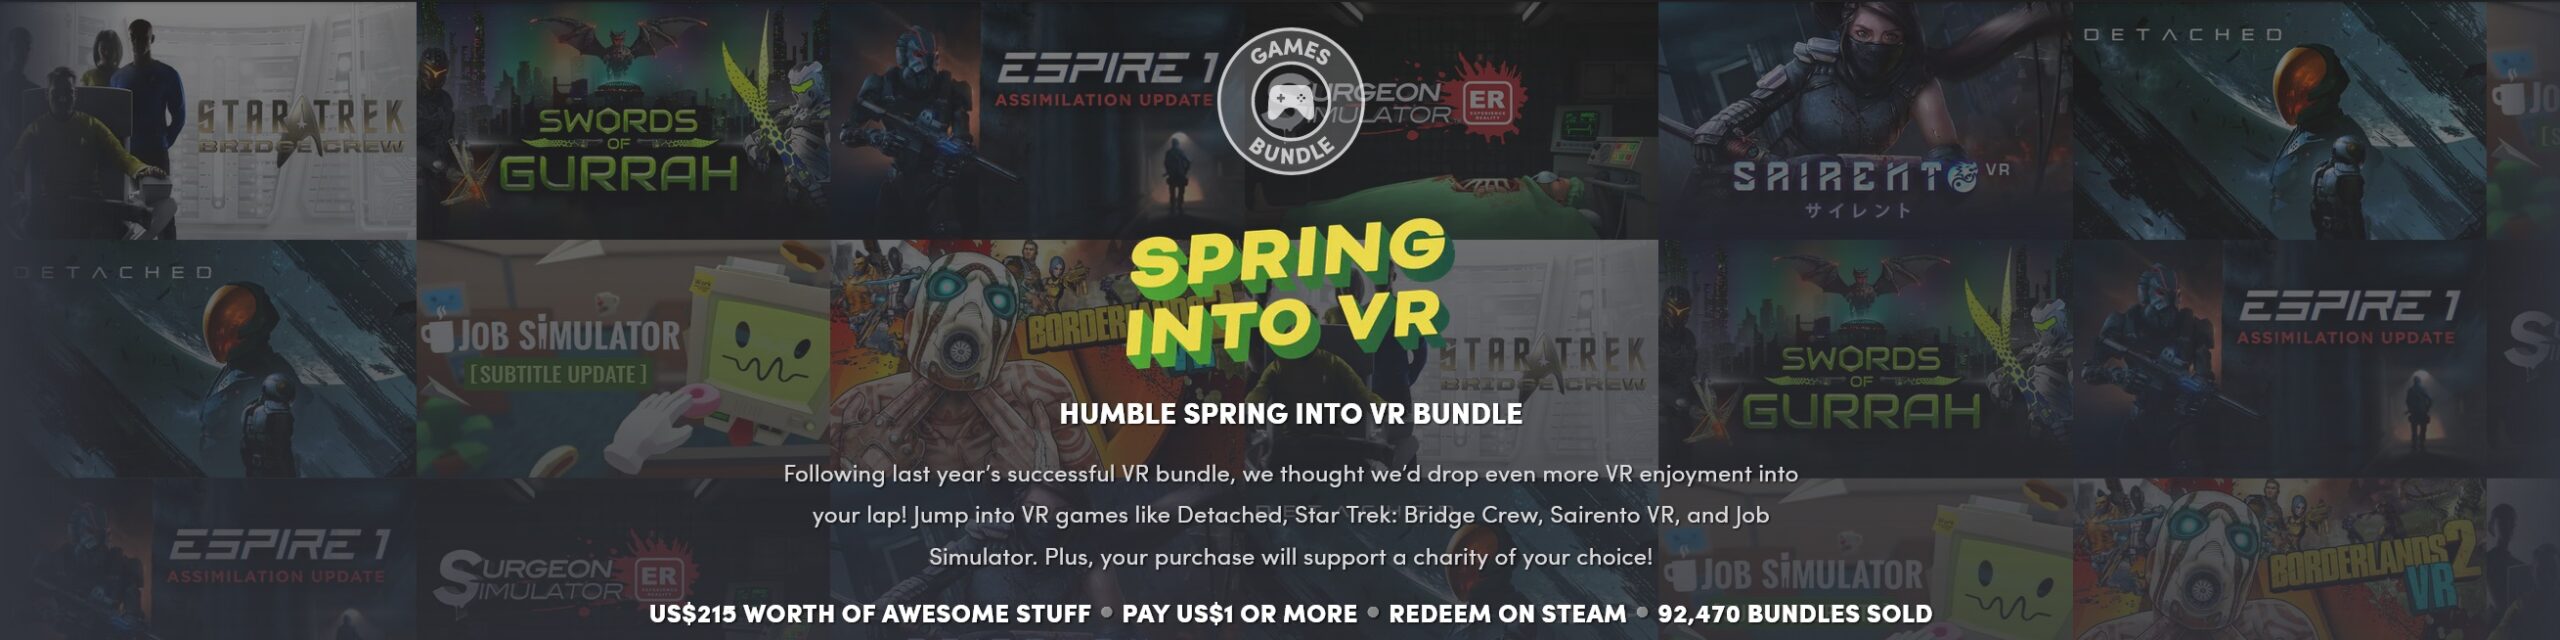 Humble Spring Into Vr Bundle